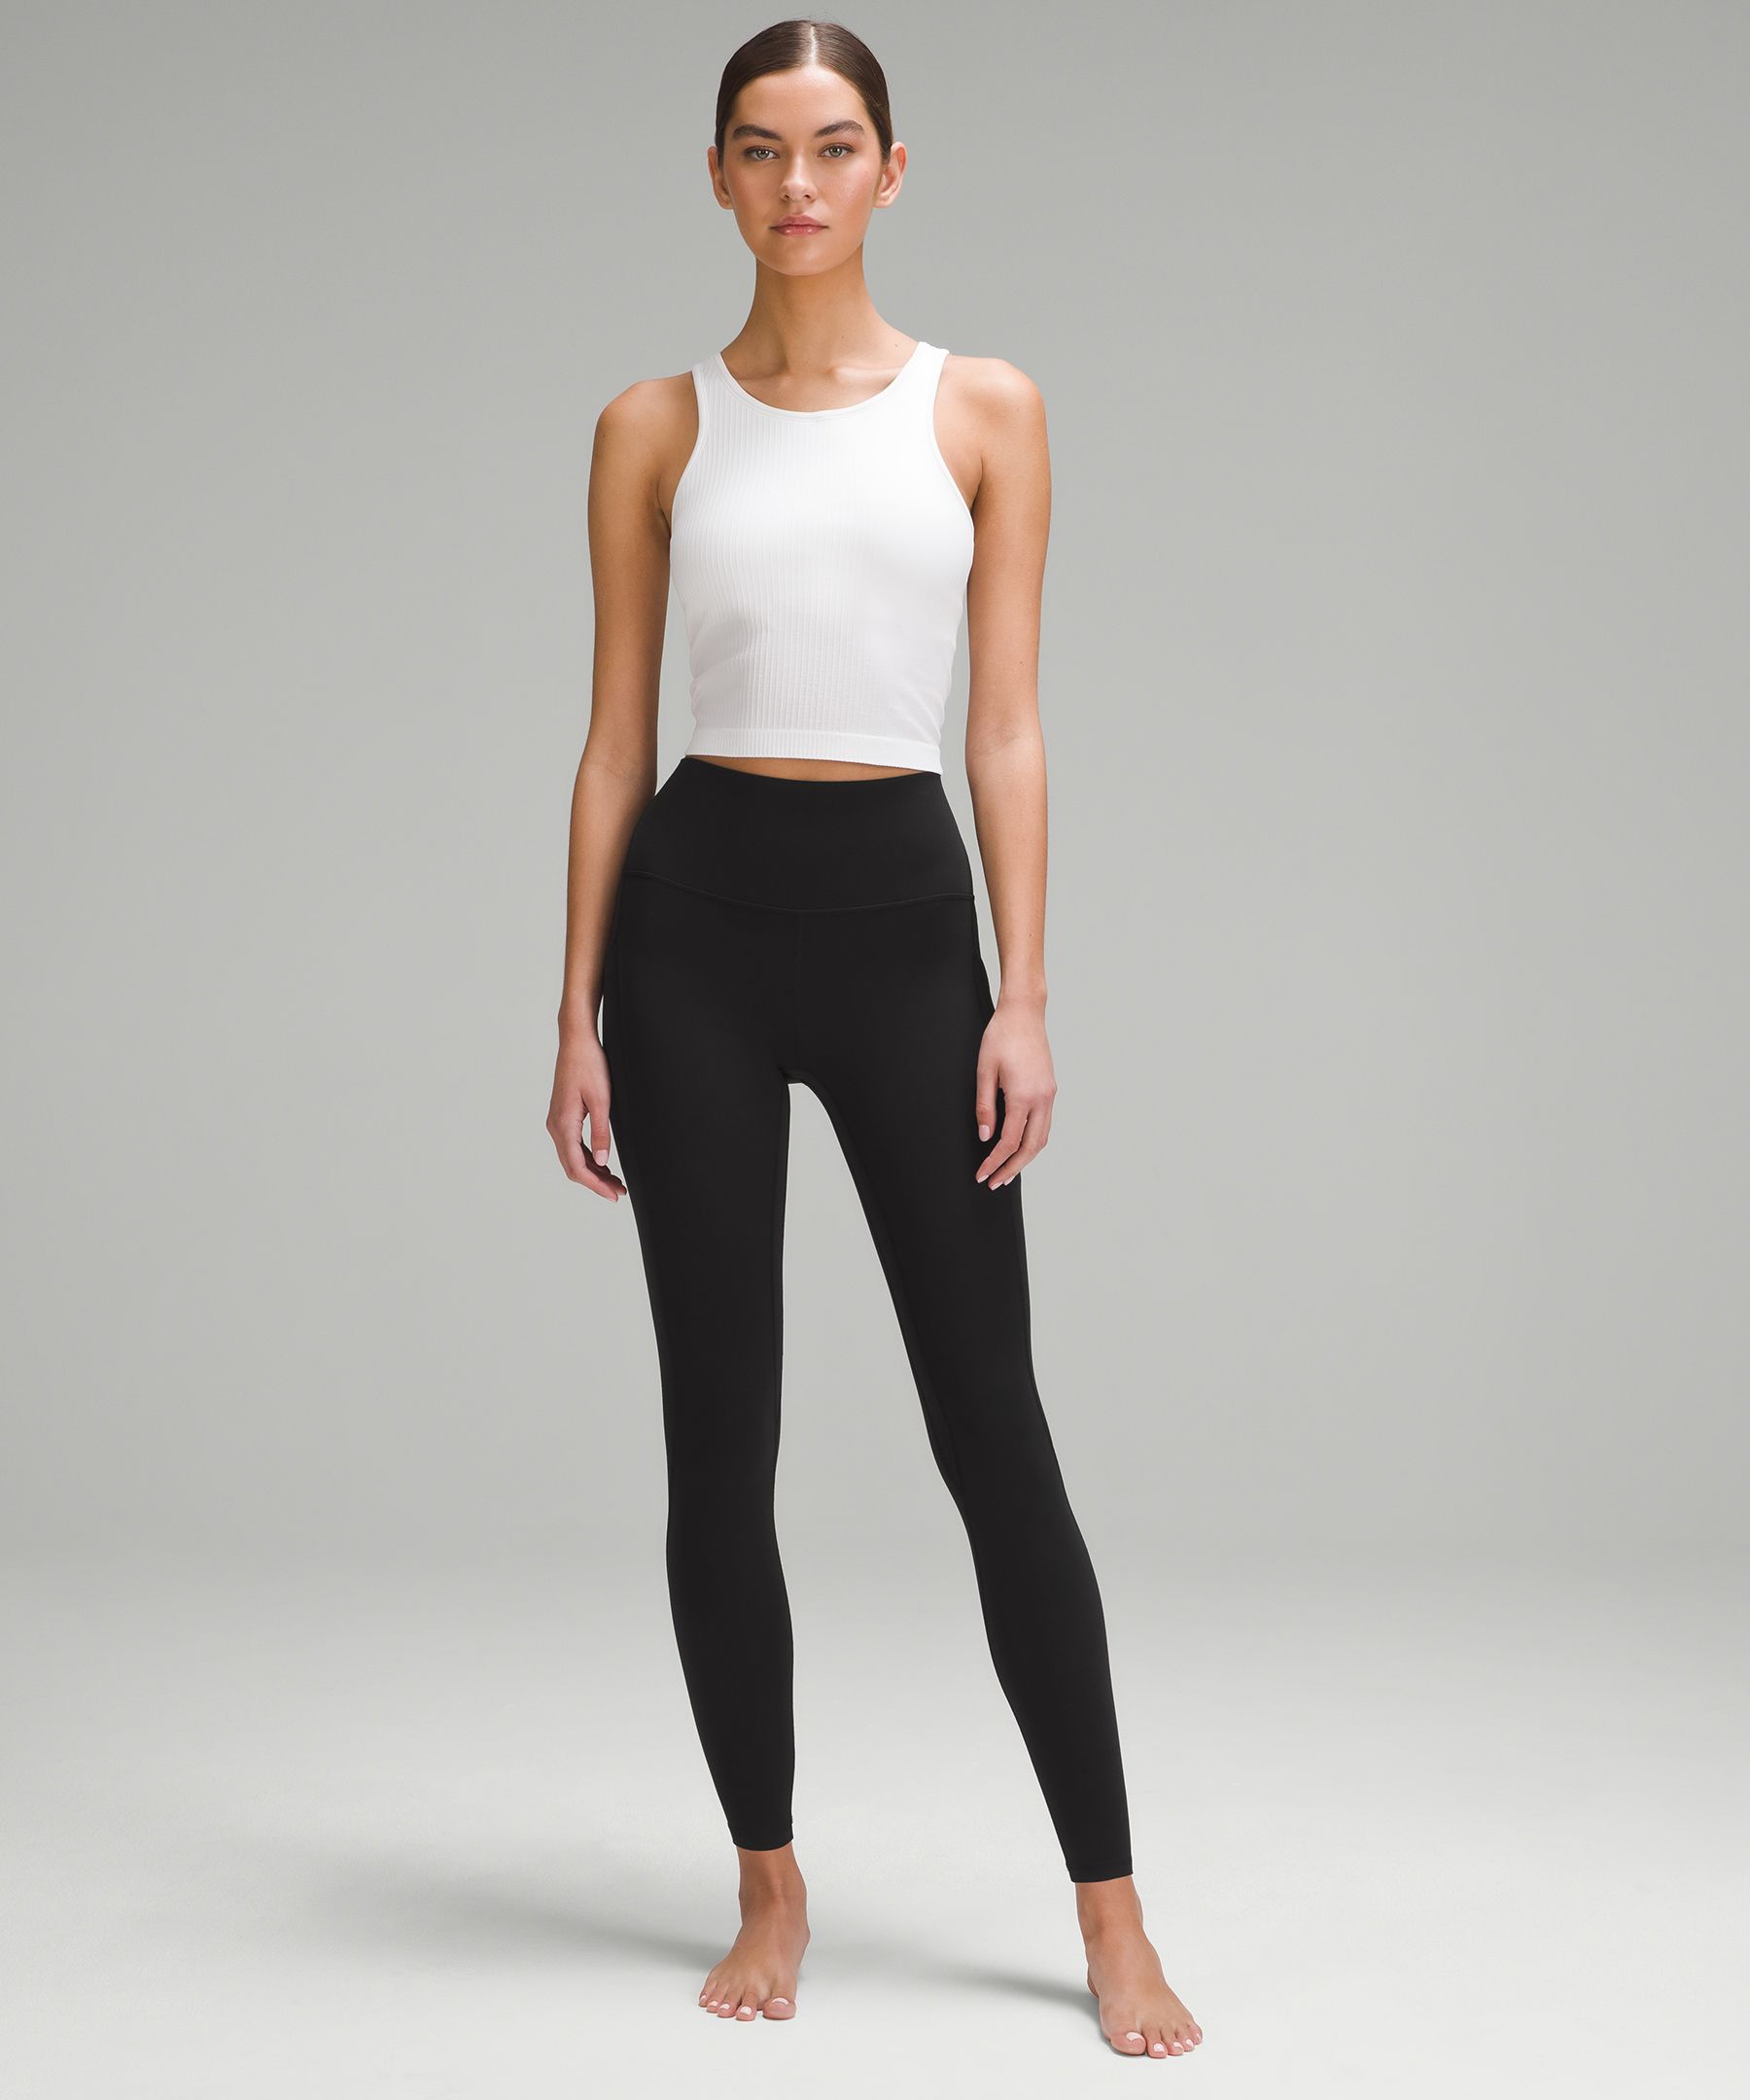 lululemon Align™ High-Rise Pant with Pockets 31